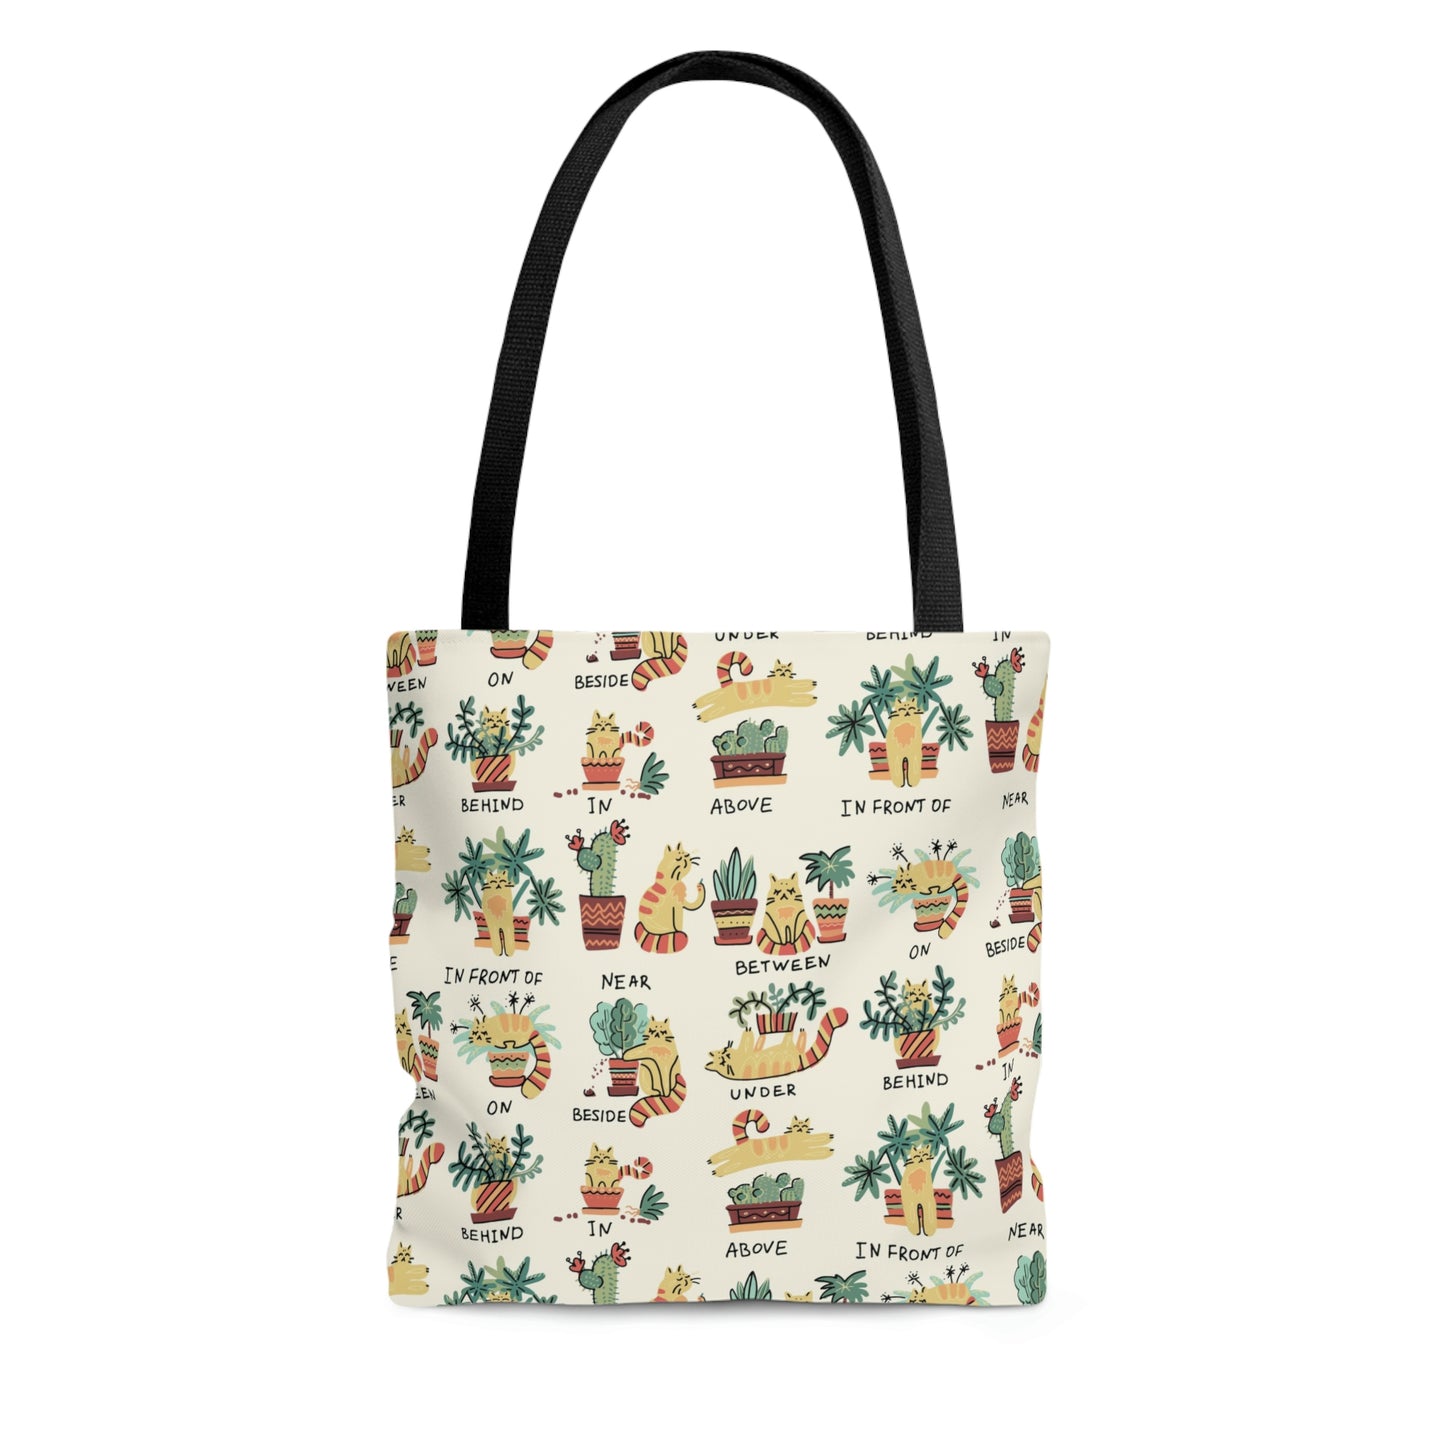 Cat Tote Bag for cat lovers. Funny cats and plants bag for plant lady or cat lady. Funny birthday gift for cat mama. Potted plants and cat